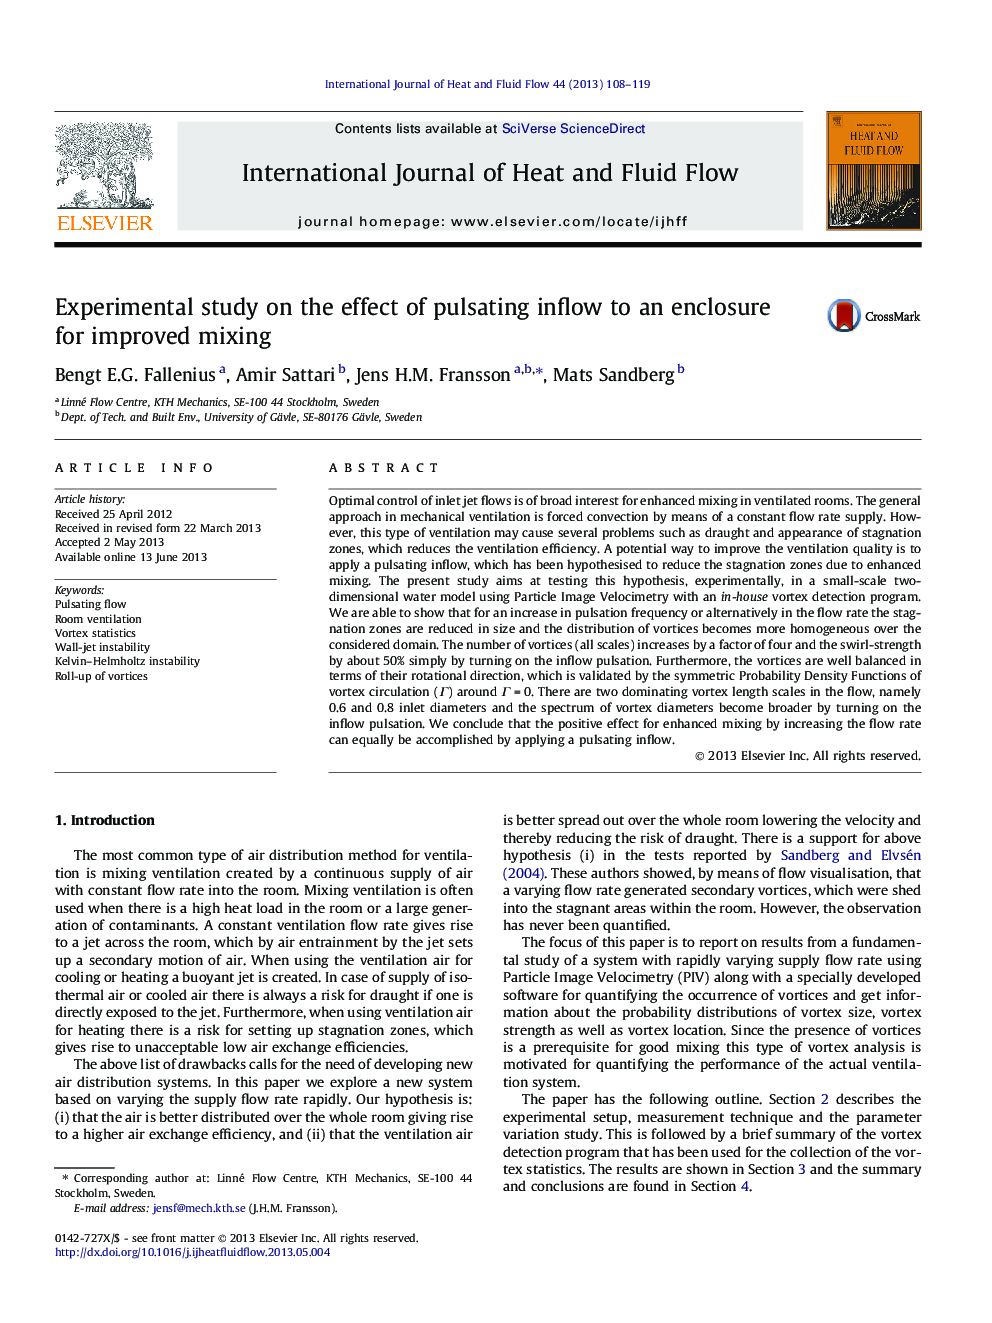 Experimental study on the effect of pulsating inflow to an enclosure for improved mixing